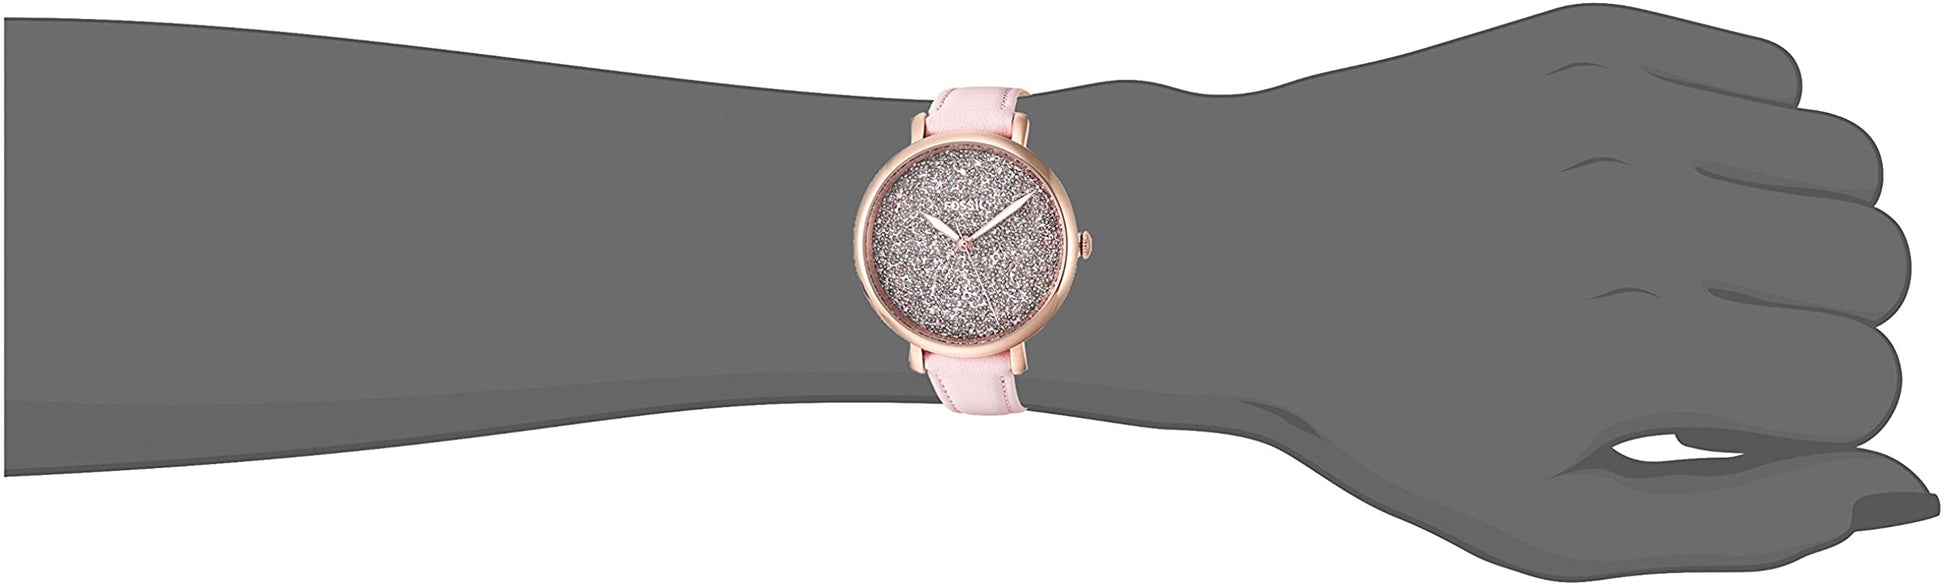 Jacqueline Watch (Pastel Pink/Rose-Gold) | Fossil | Luby 